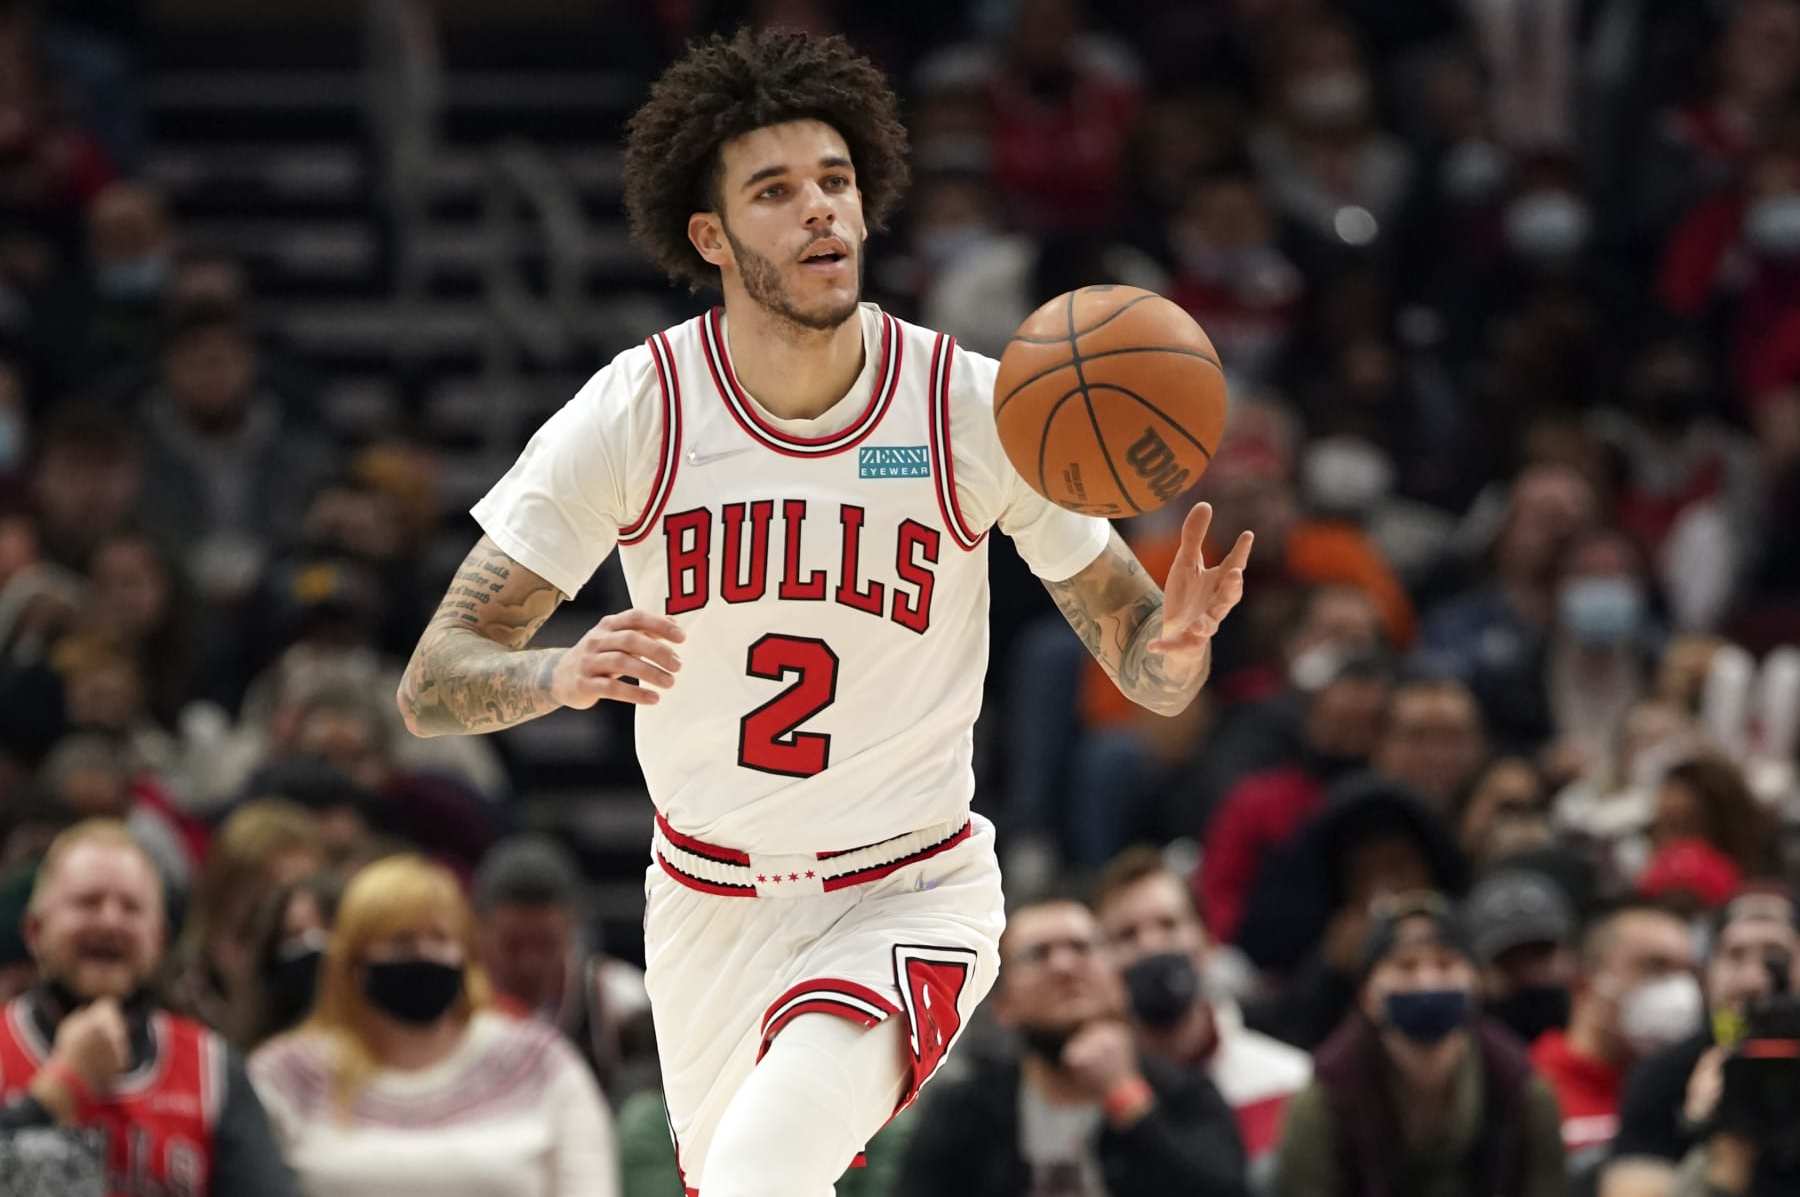 Lonzo Ball expresses disappointment at $80,000,000 Bulls tenure